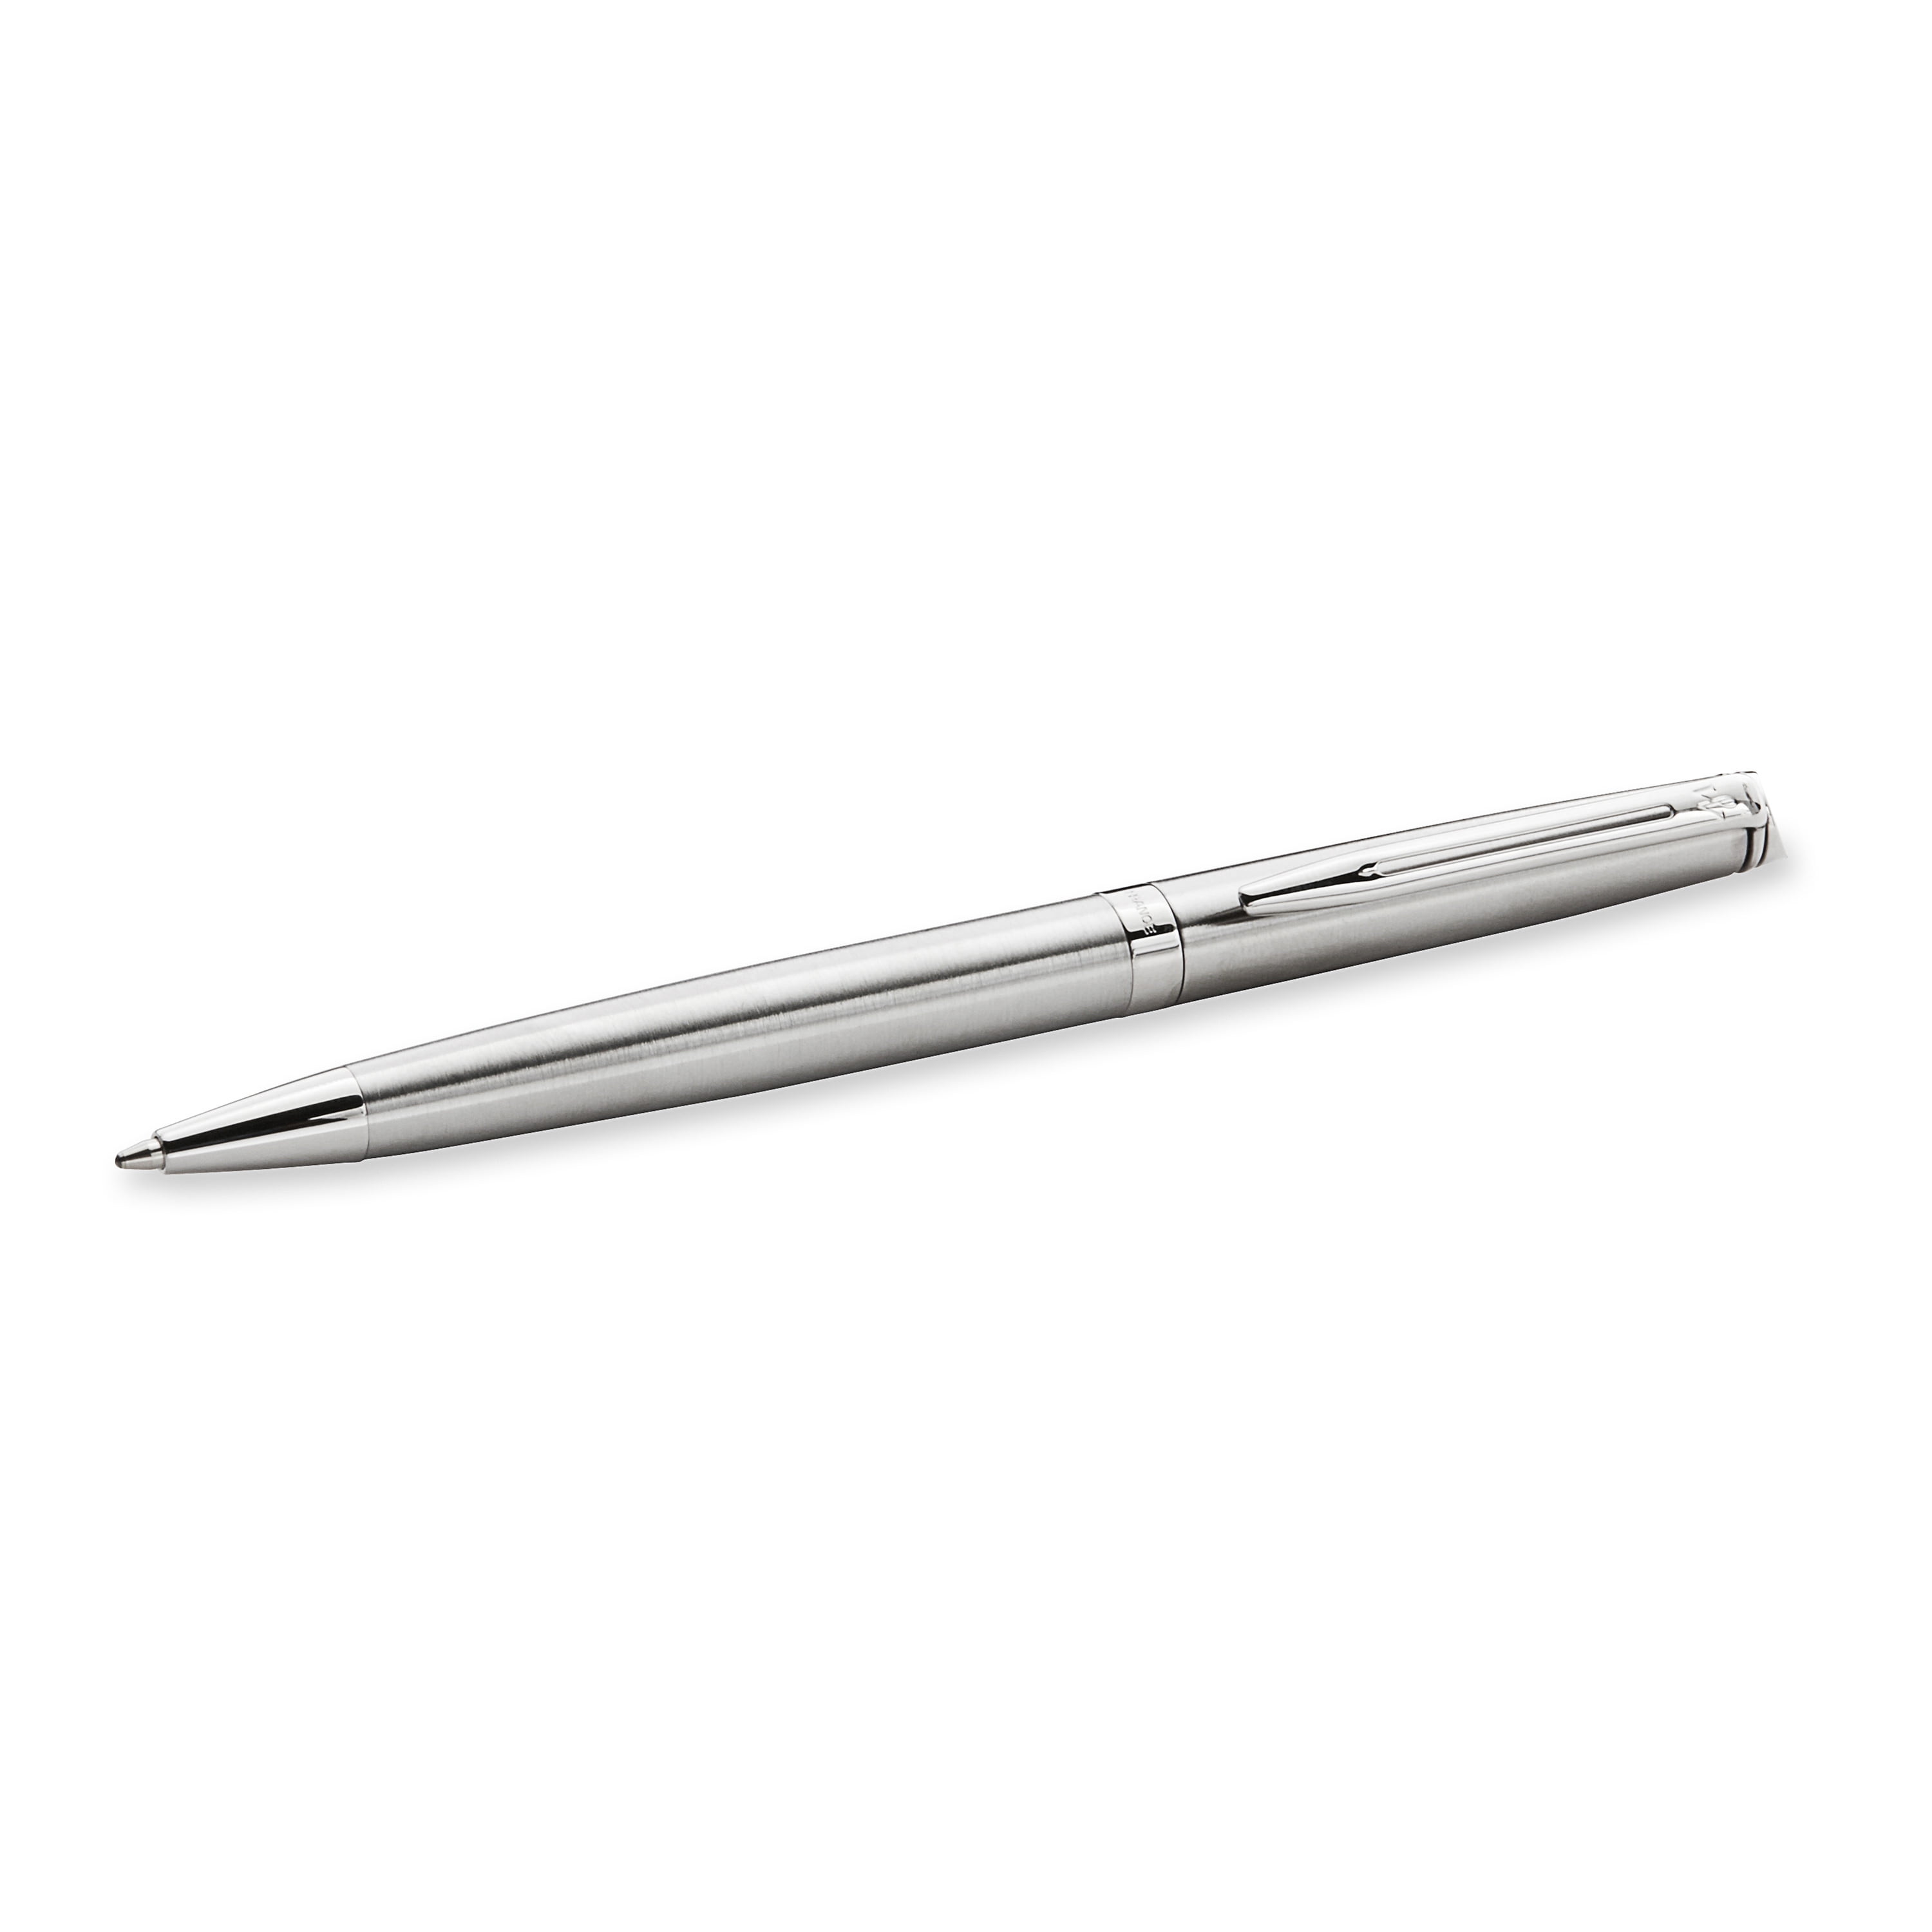 Contemporary Professional SILVER CHROME /STEEL BALLPOINT PEN Blue & Black ink 